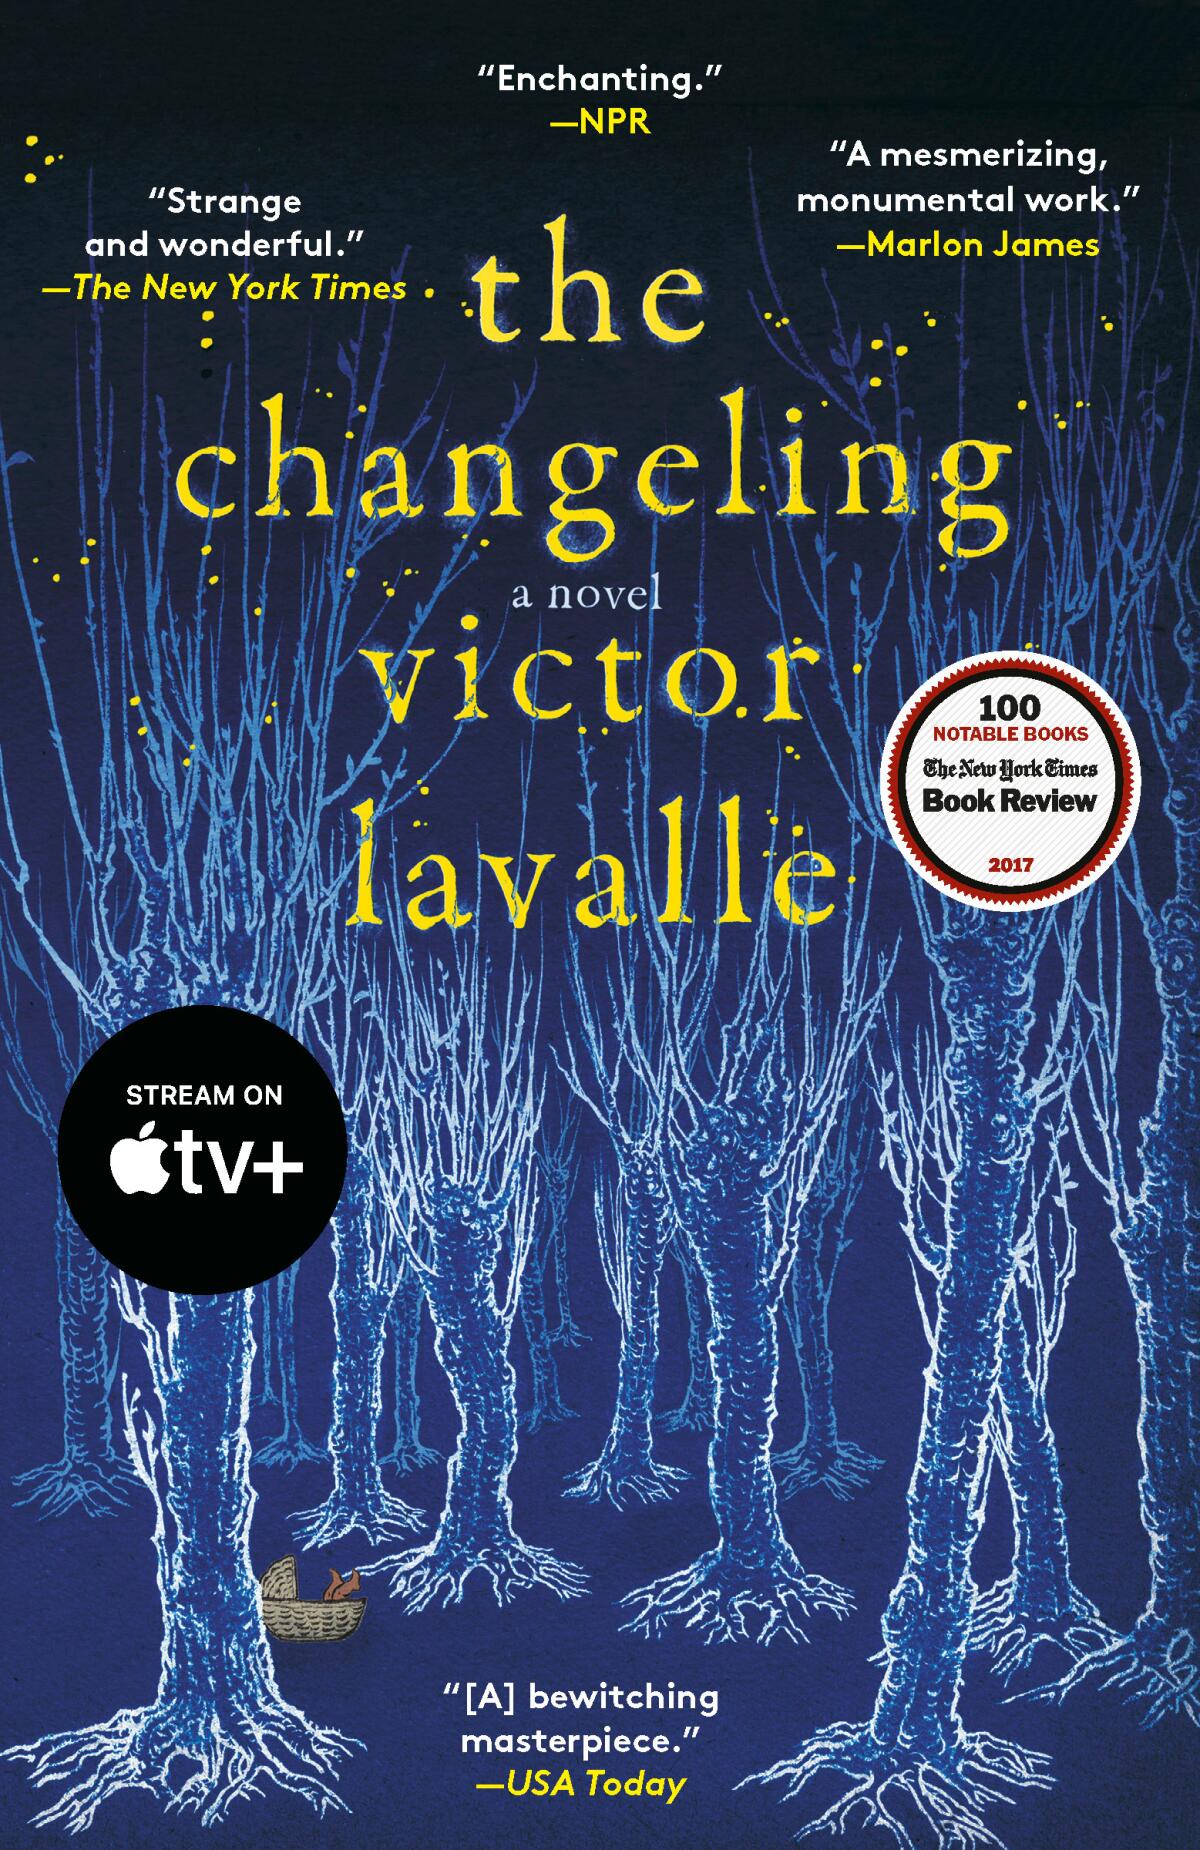 "The Changeling" by Victor LaValle